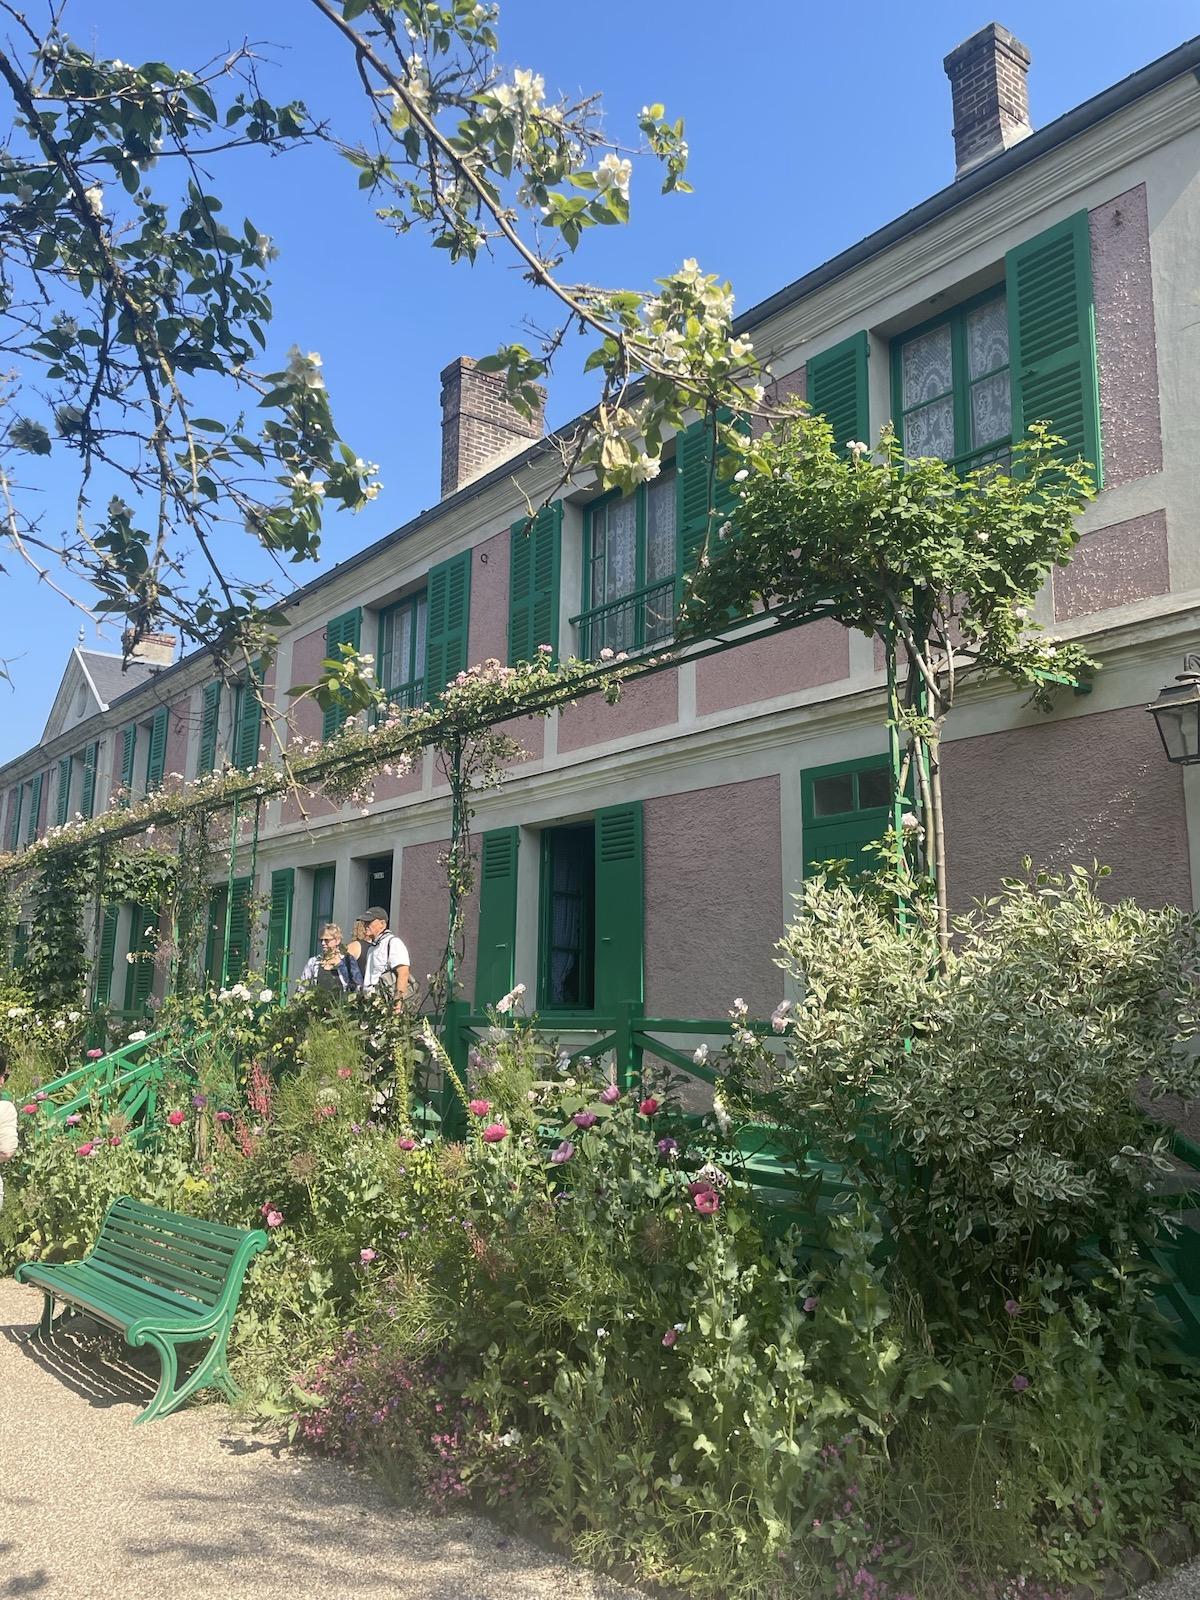 Monet’s Garden in Giverny, view of the main house